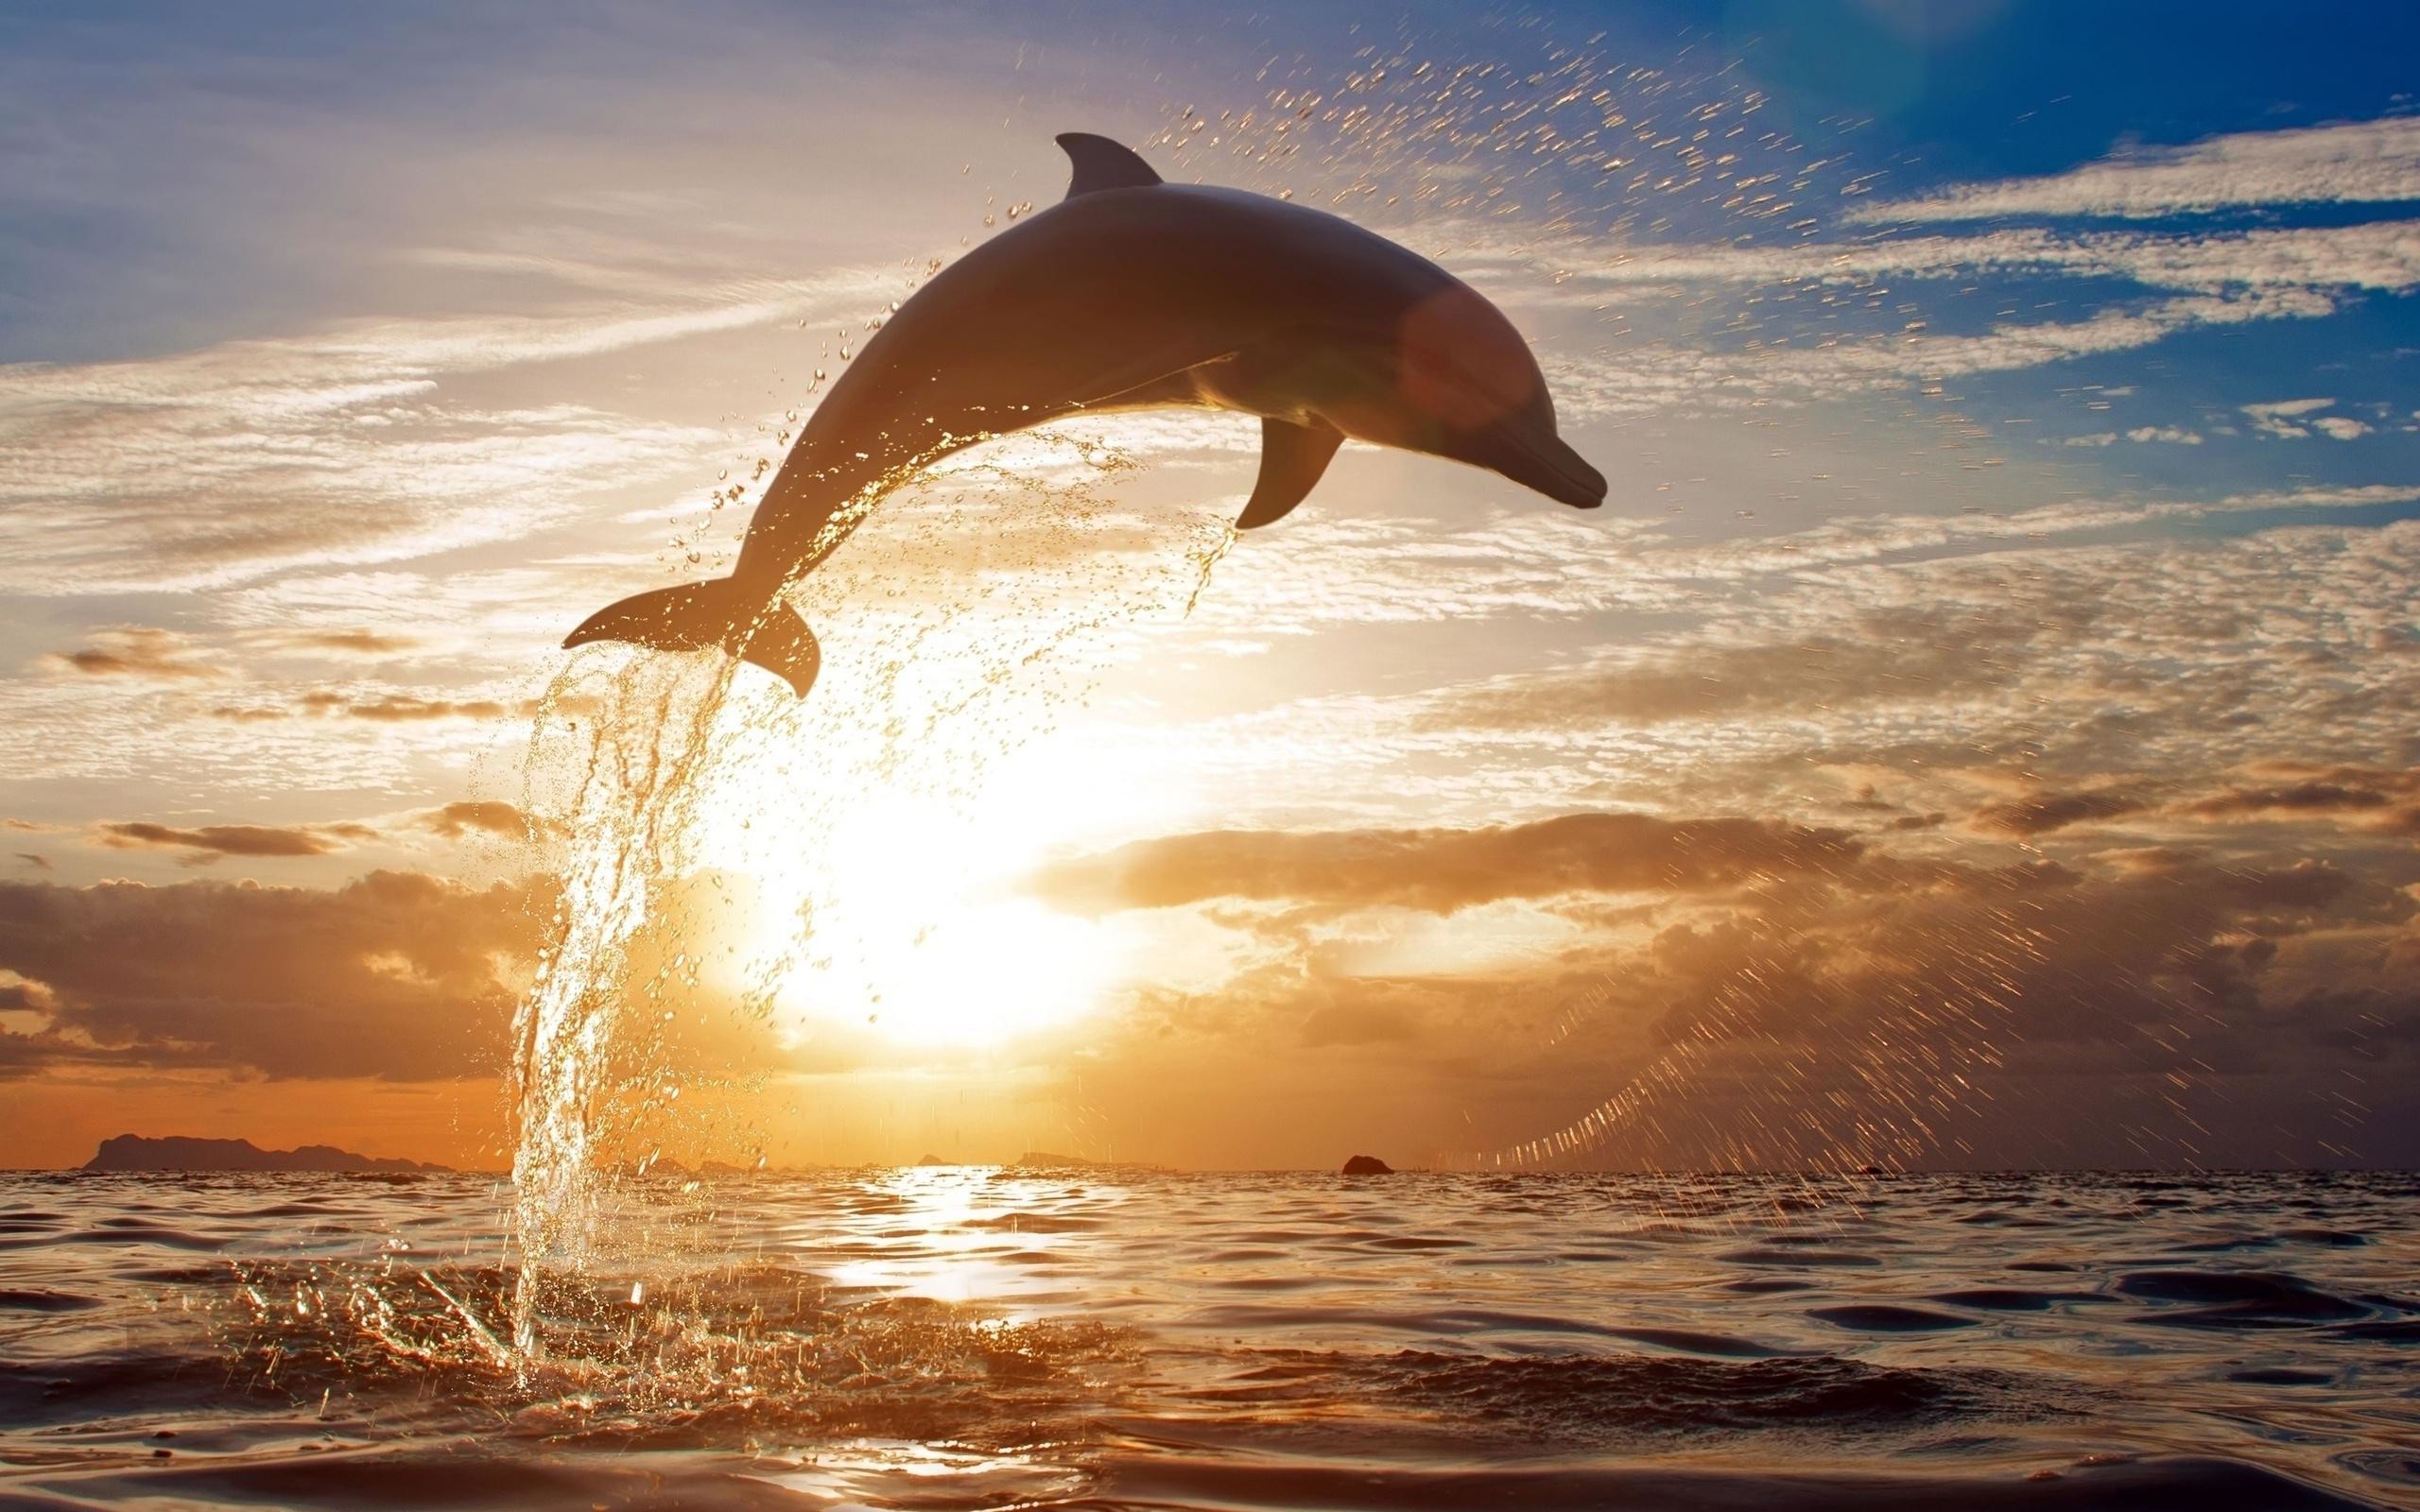 2560x1600 Dolphin Sunset Image For Desktop Wallpaper 2560 x 1600 px 1.2 MB jumping  animated purple cute